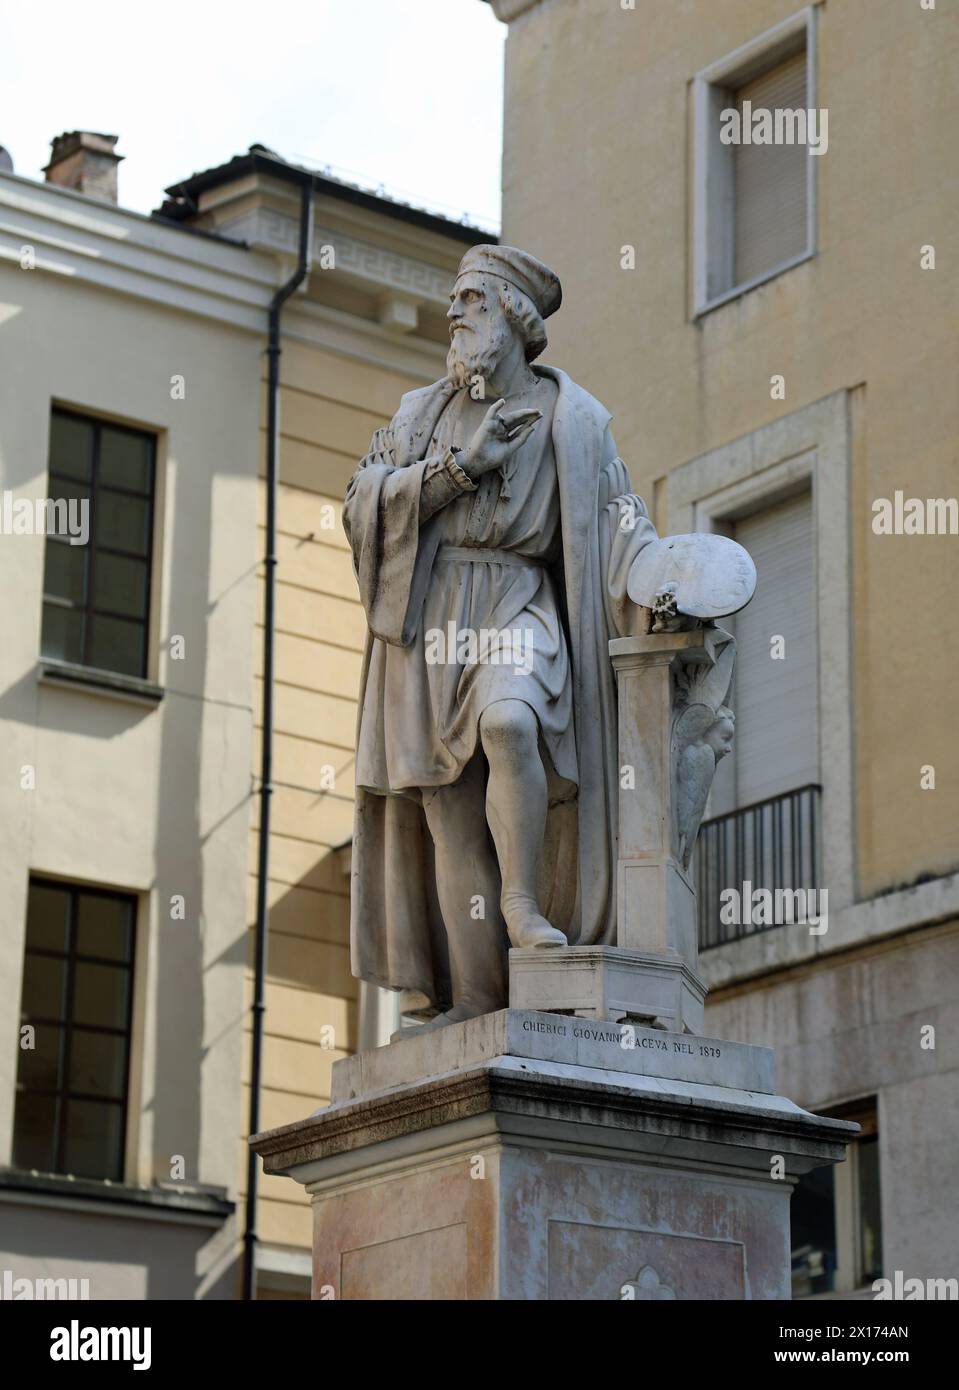 Francesco Mazzola monument at Parma in northern Italy Stock Photo